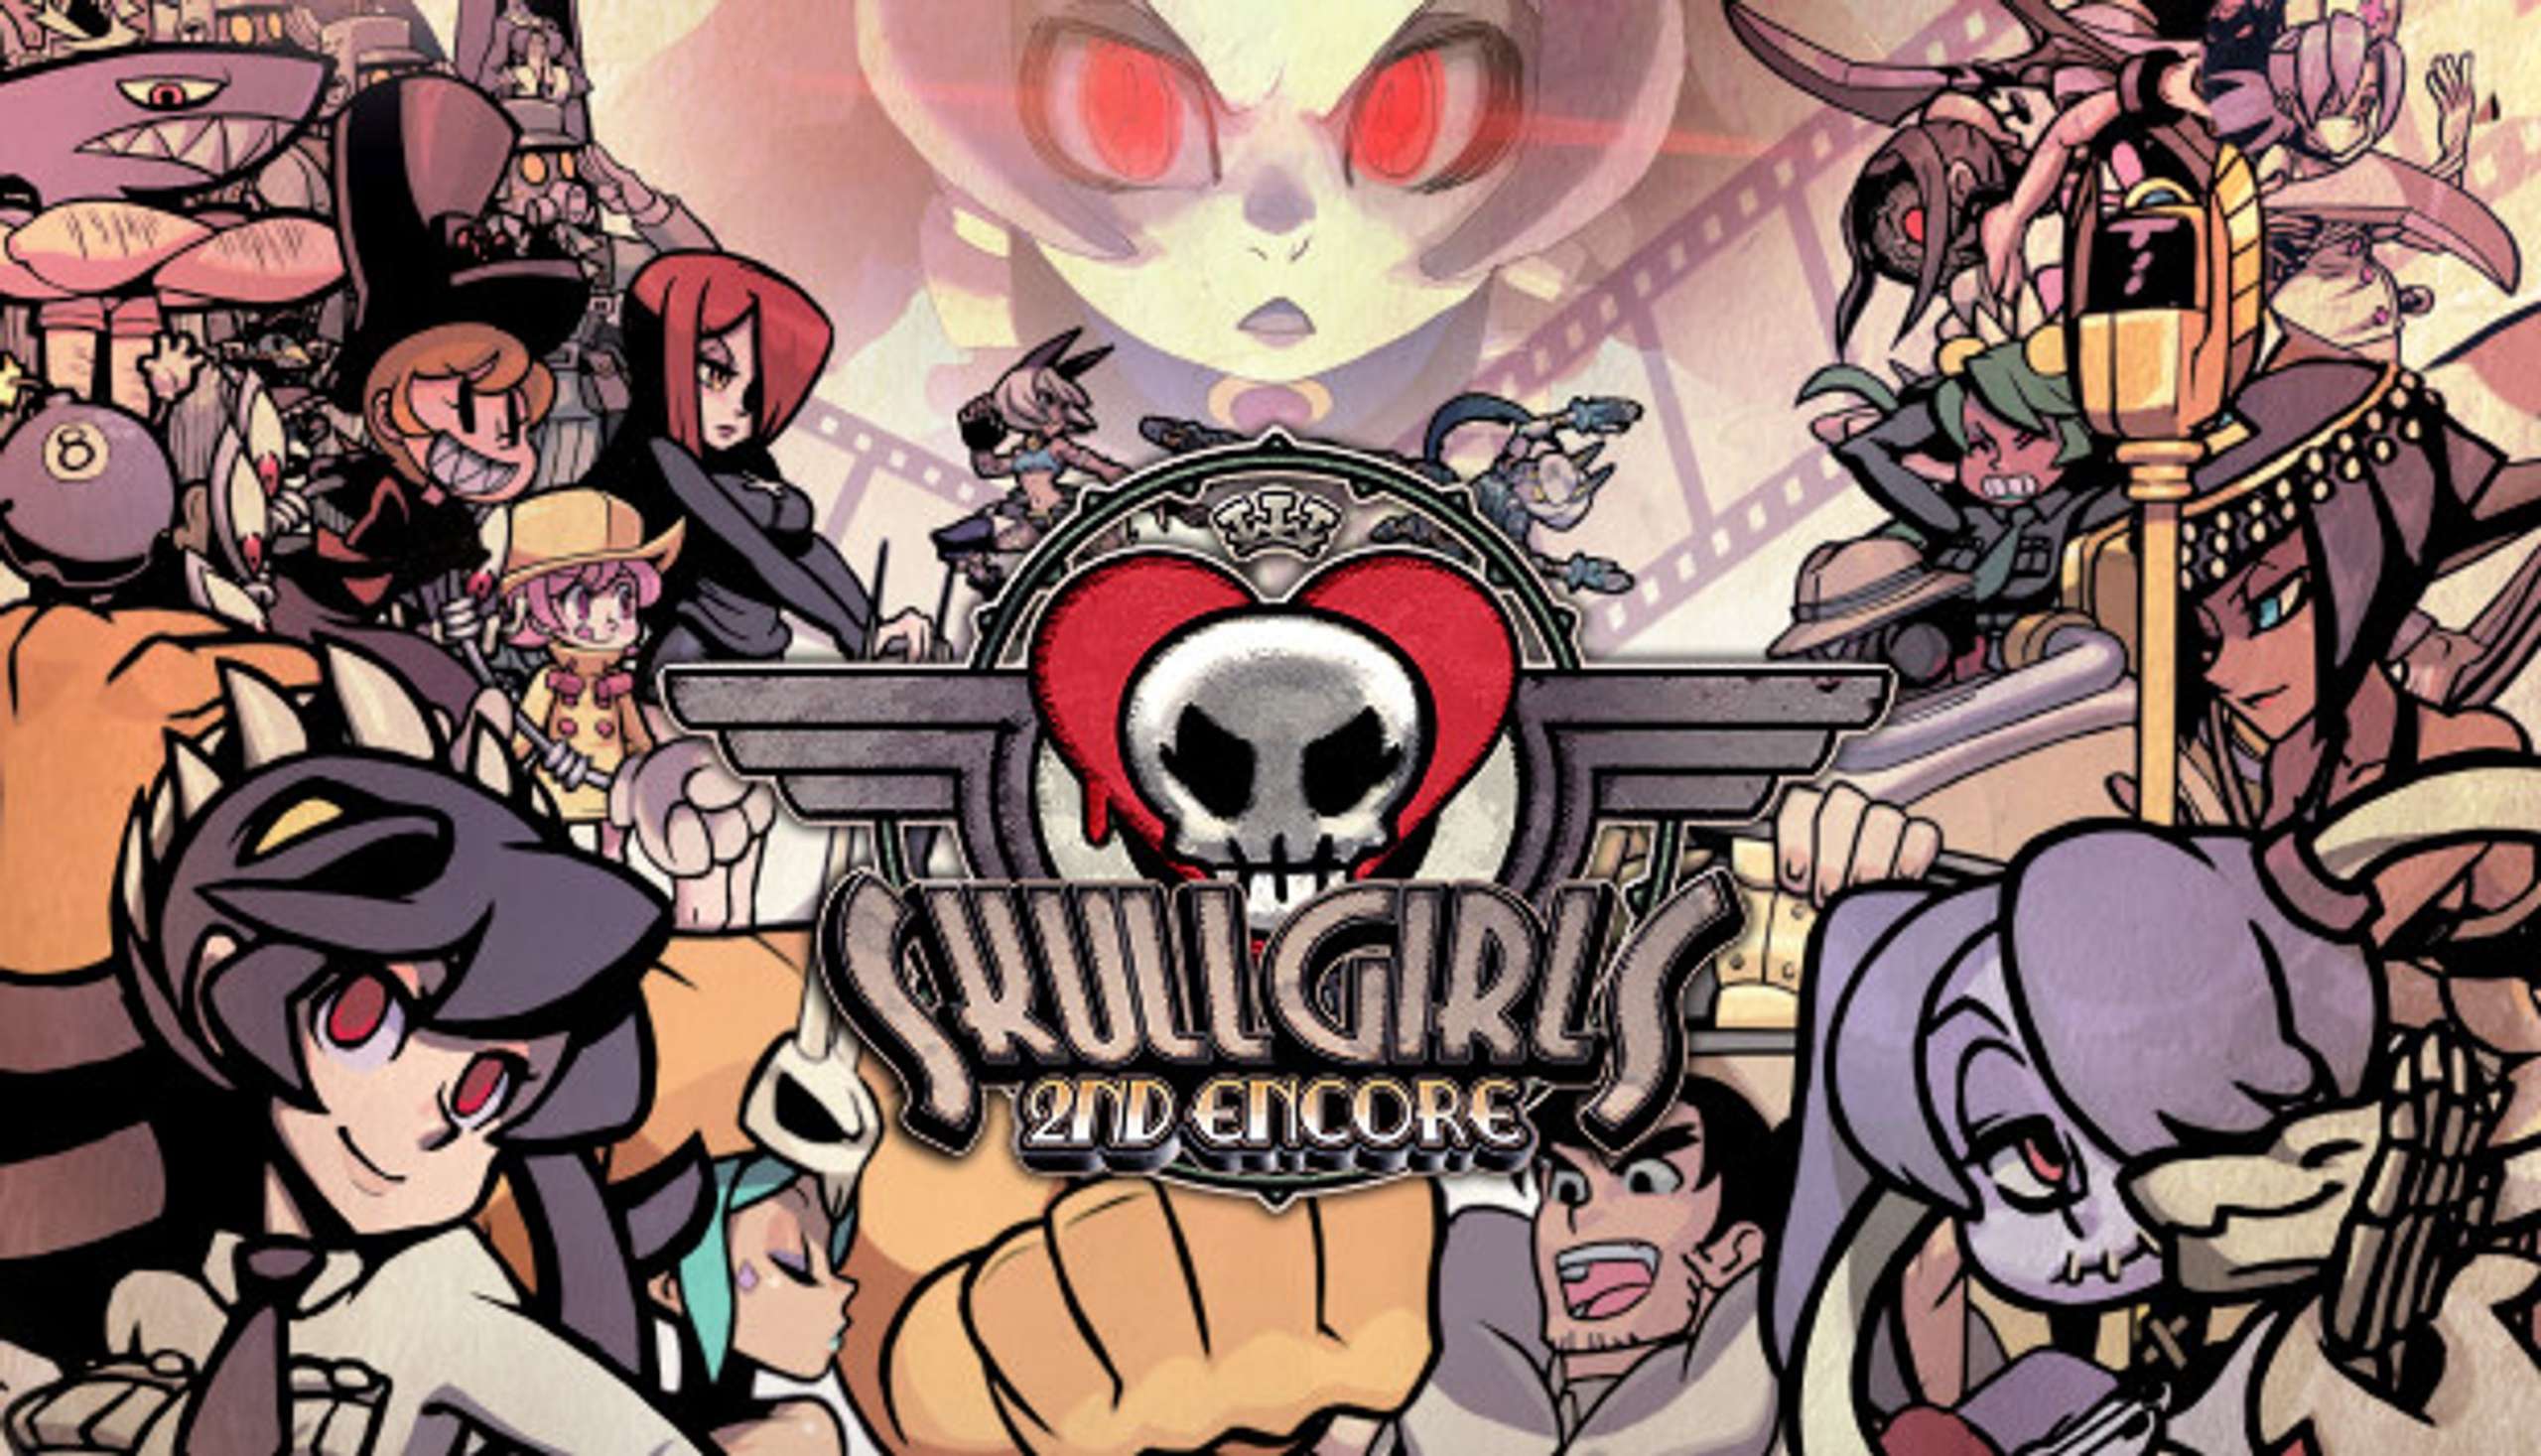 A New Character Will Be Added To The Fighting Game Skullgirls 2nd Encore In 2023